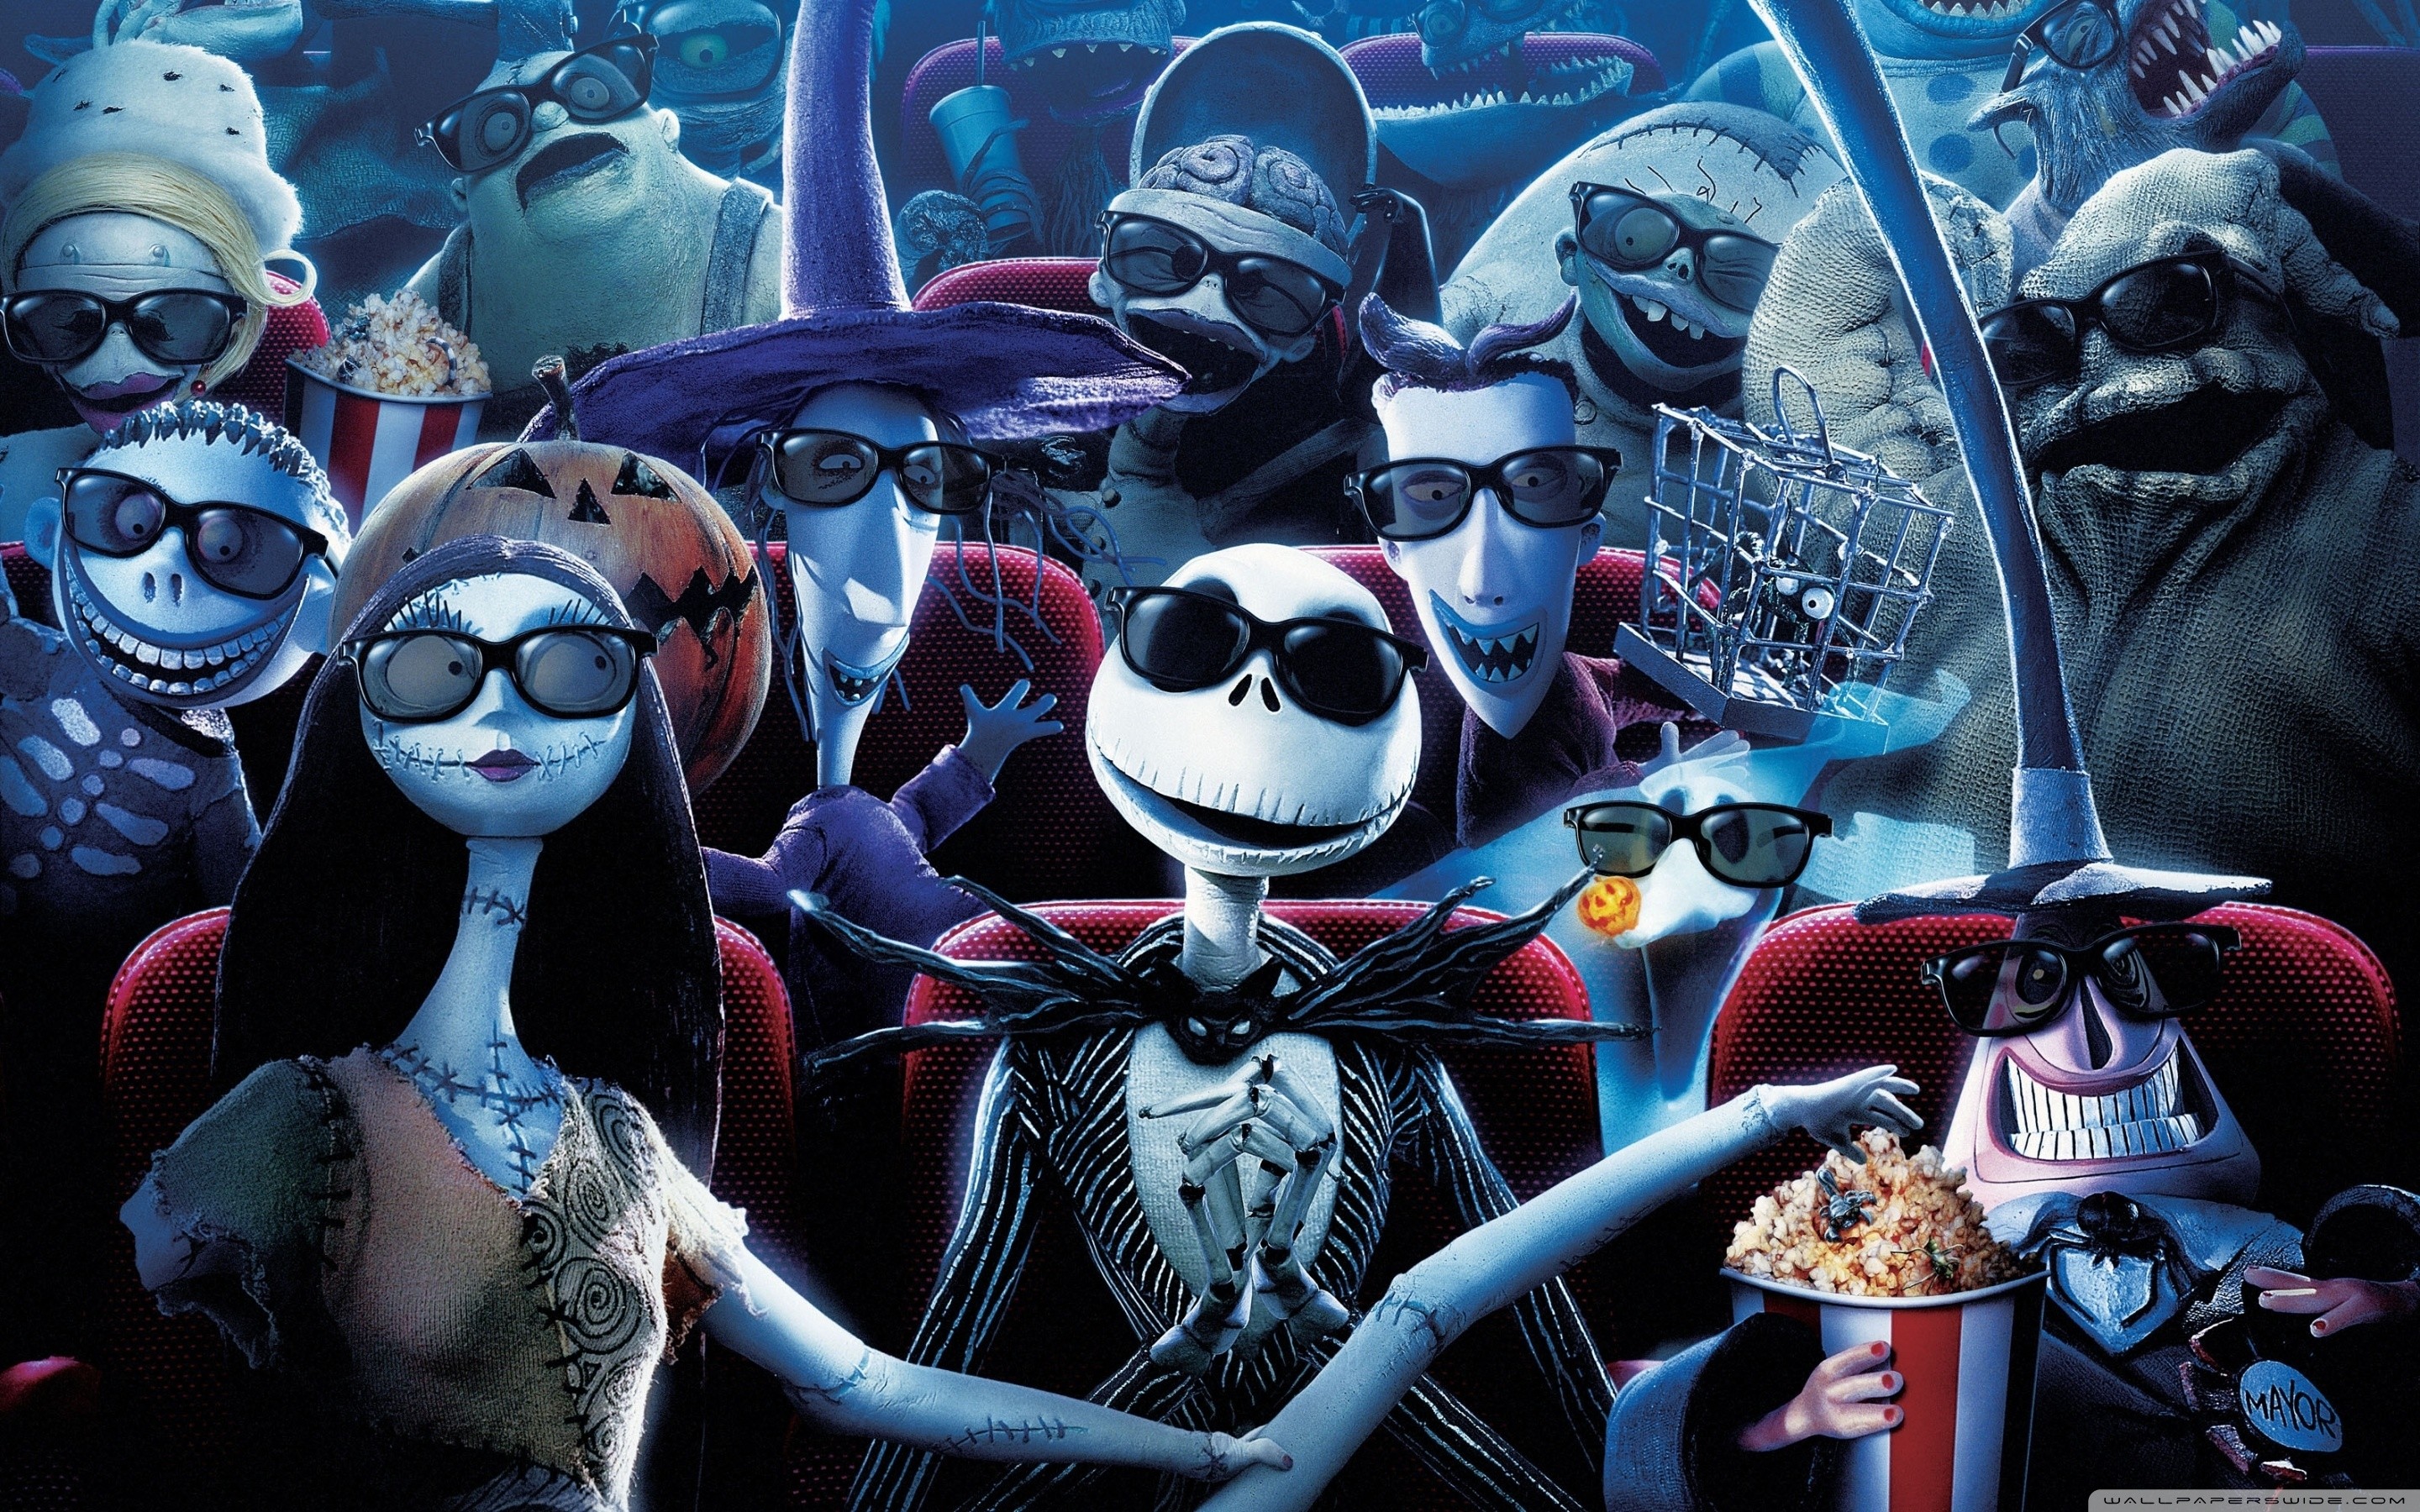 2880x1800 Title : nightmare before christmas â¤ 4k hd desktop wallpaper for 4k ultra.  Dimension : 2880 x 1800. File Type : JPG/JPEG